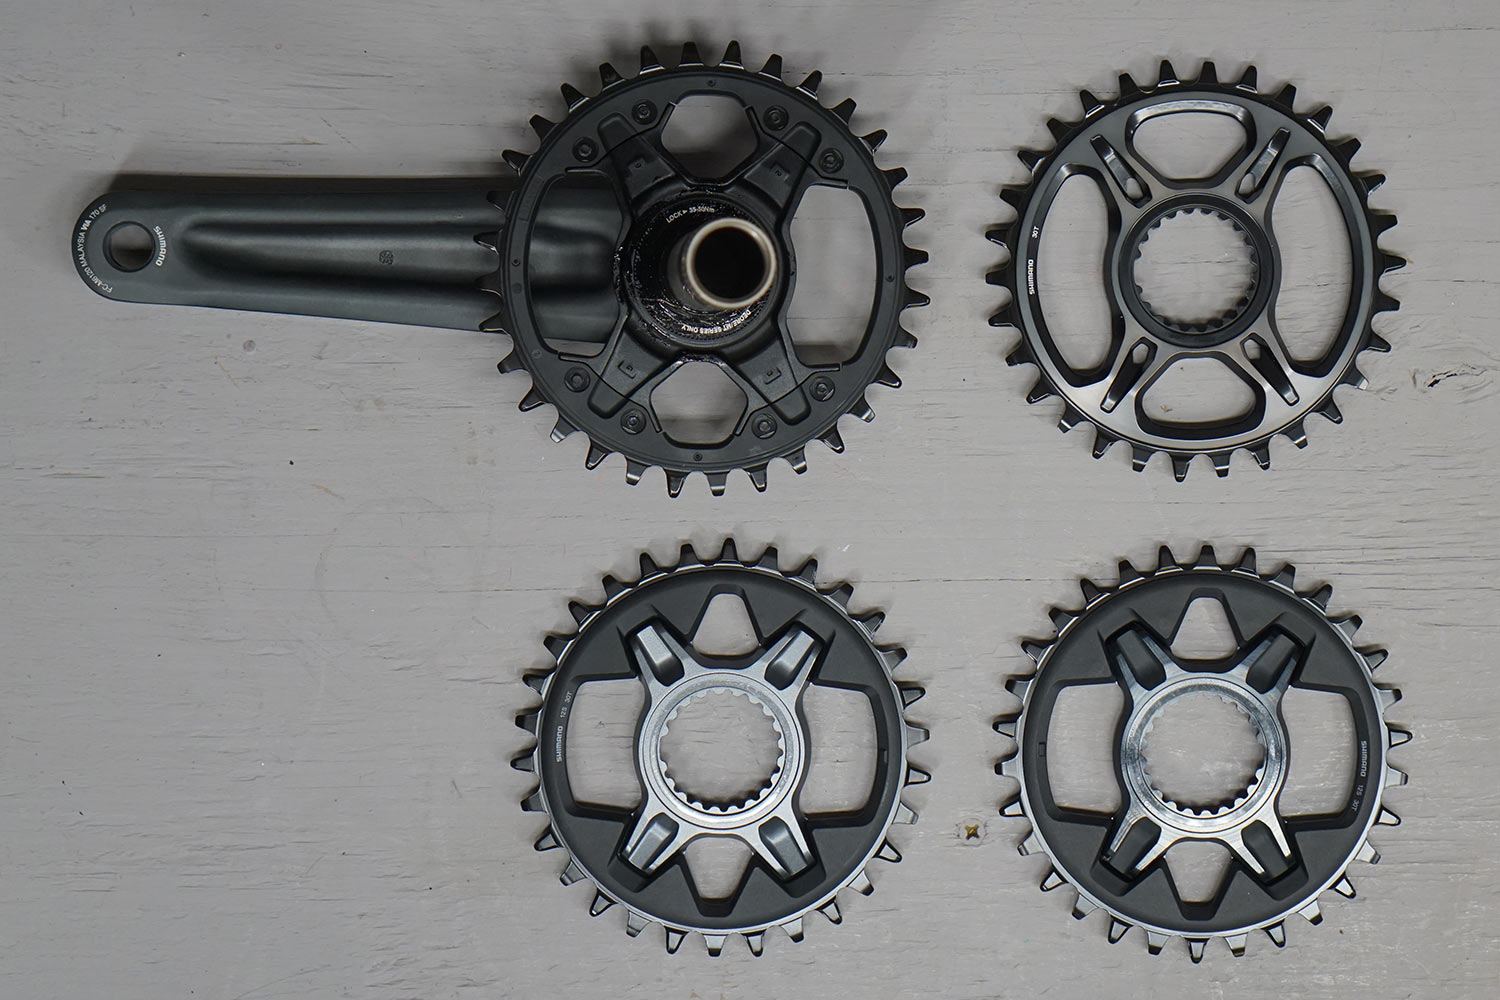 shimano 12 speed chainrings for deore, slx, xt and xtr shown side by side in a comparison